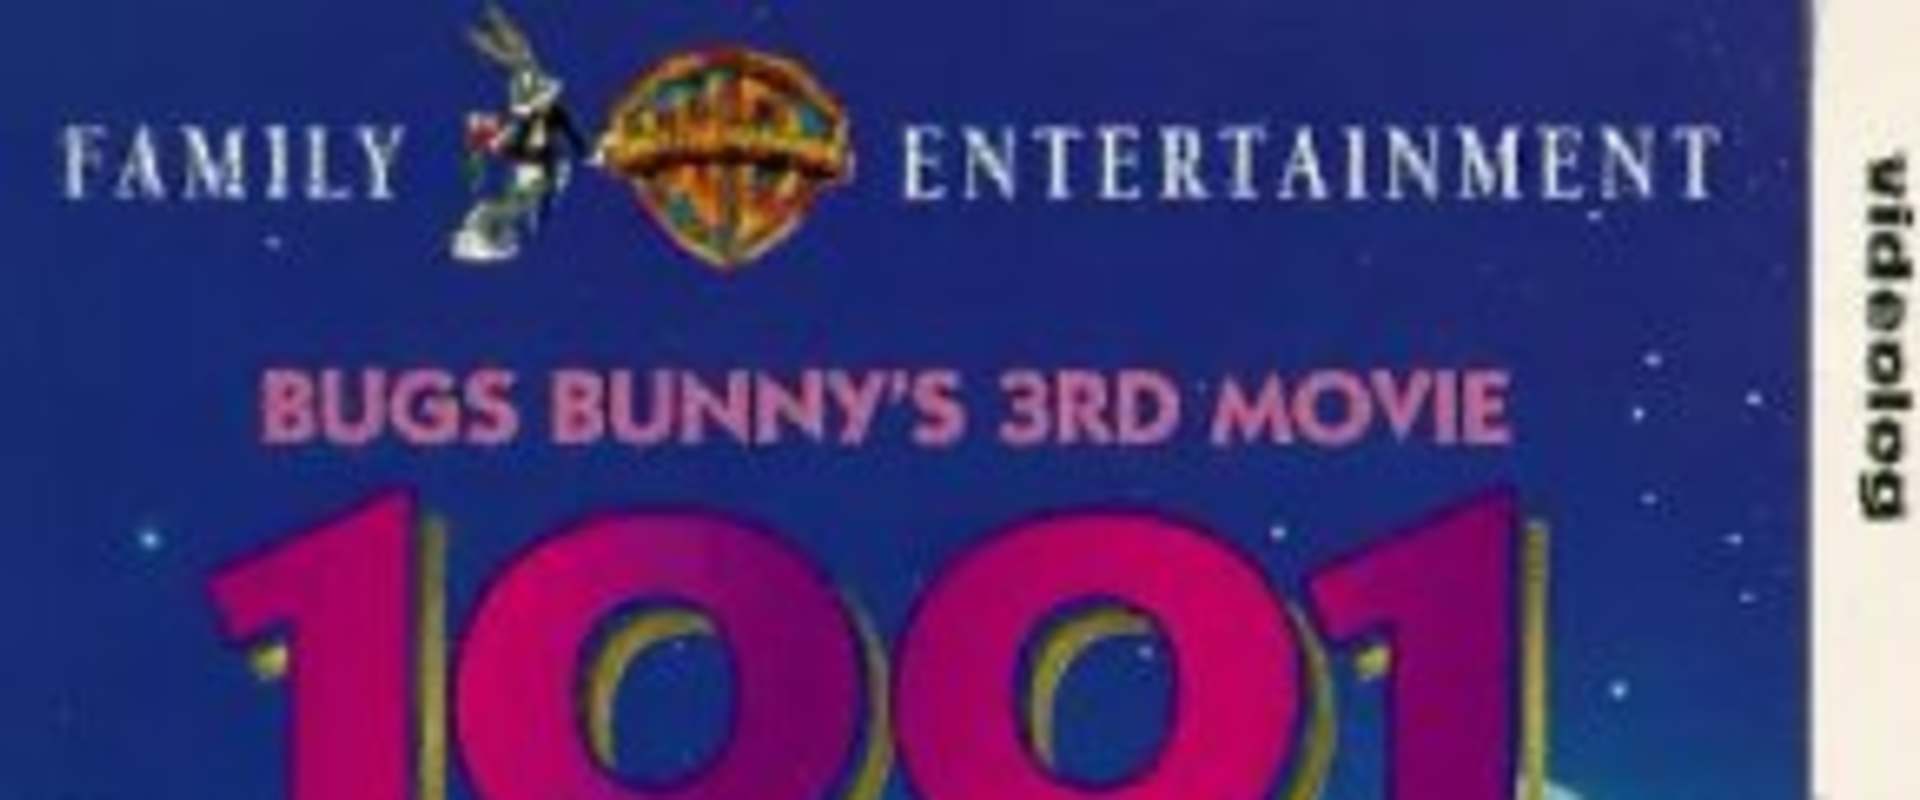 Bugs Bunny's 3rd Movie: 1001 Rabbit Tales background 2